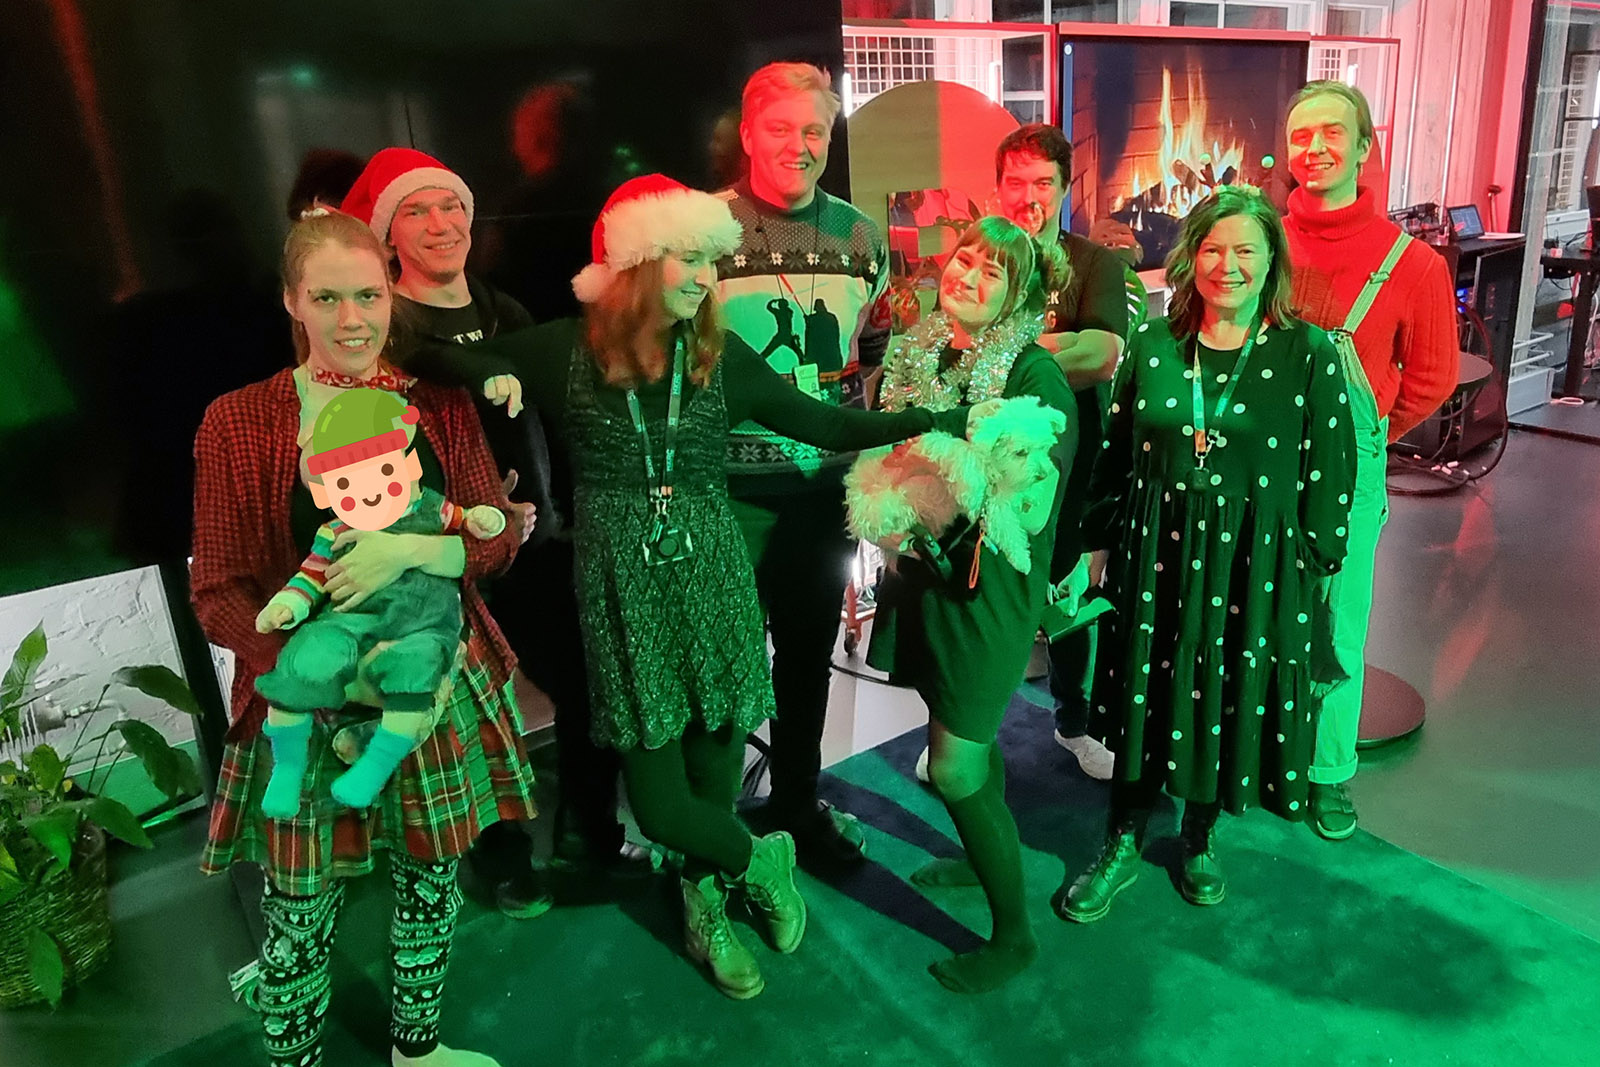 Helsinki XR Center team smiling together. One is holding a baby, and another one a small white dog. One is scratching the dog. The lighting is very christmasy: red and green.